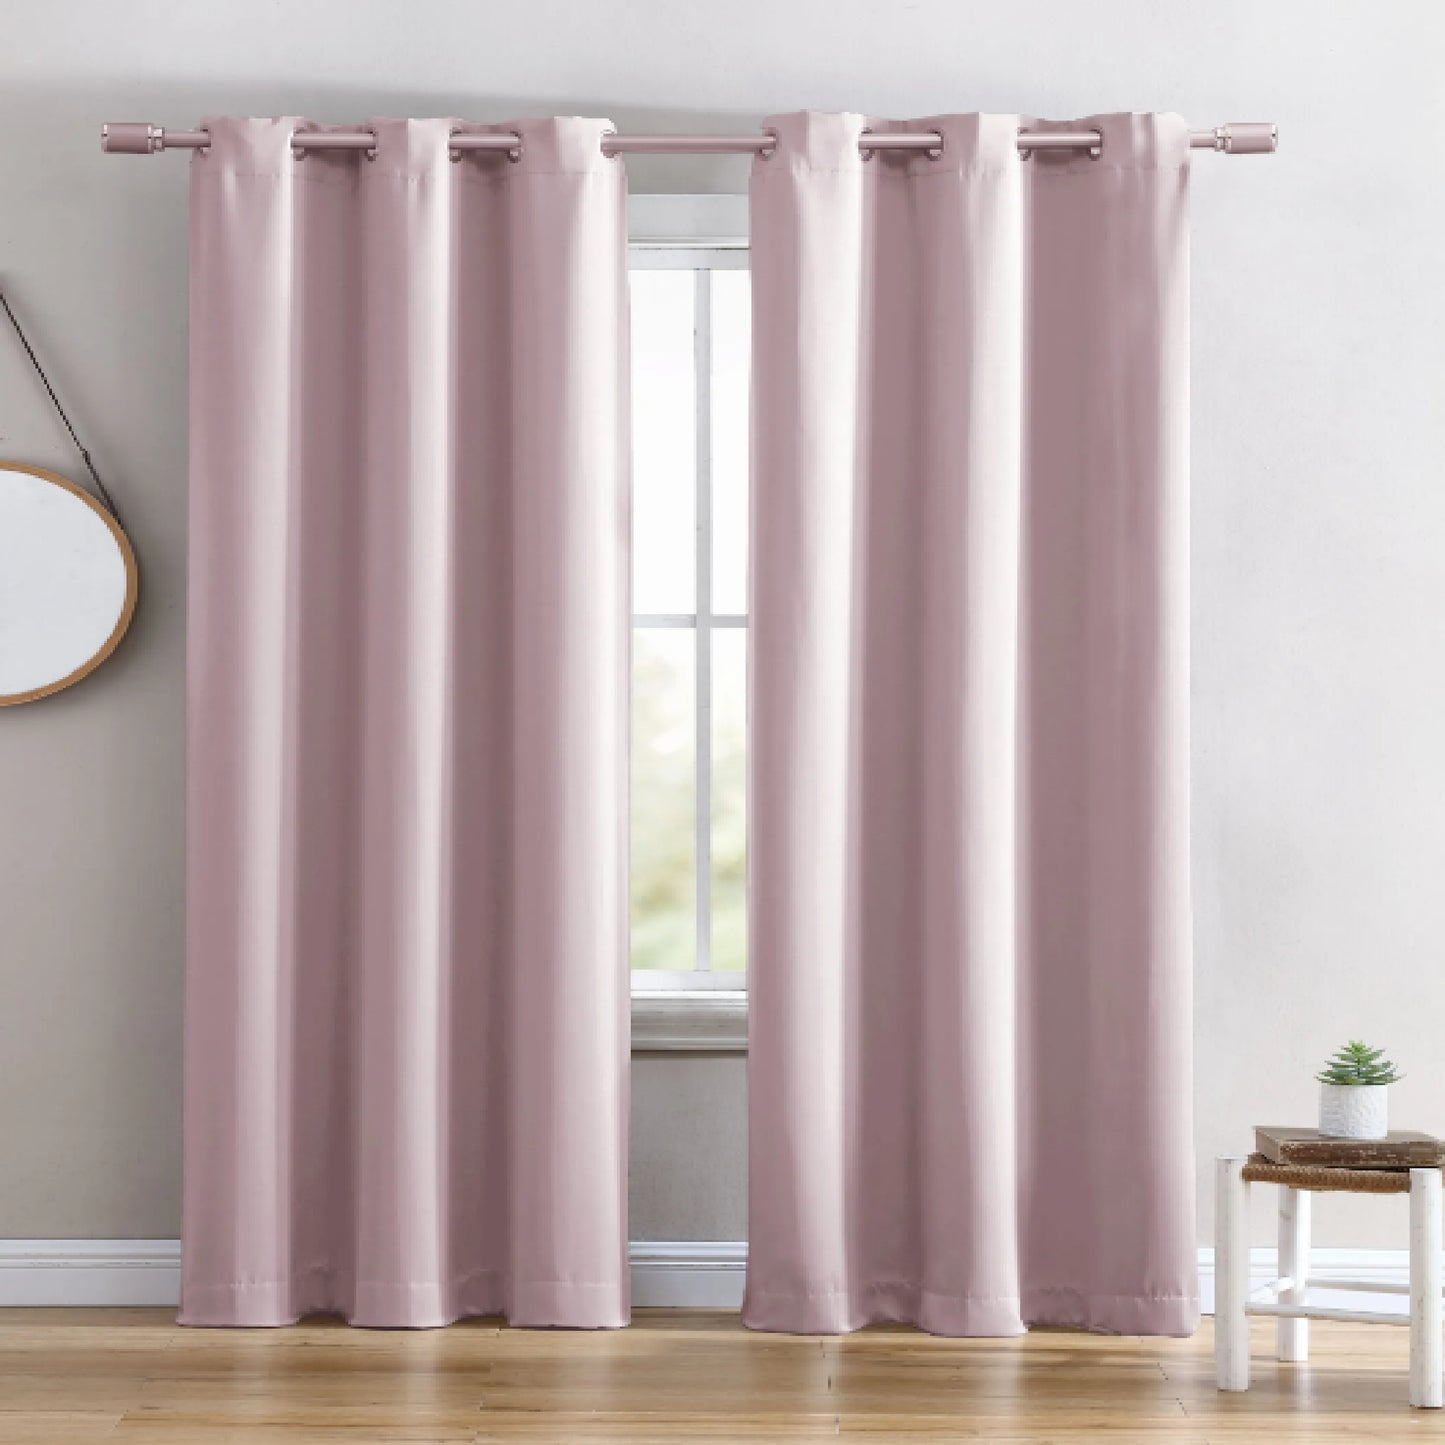 Ring Top Solid Blackout Thermal Grommet Single Curtain Panel pink